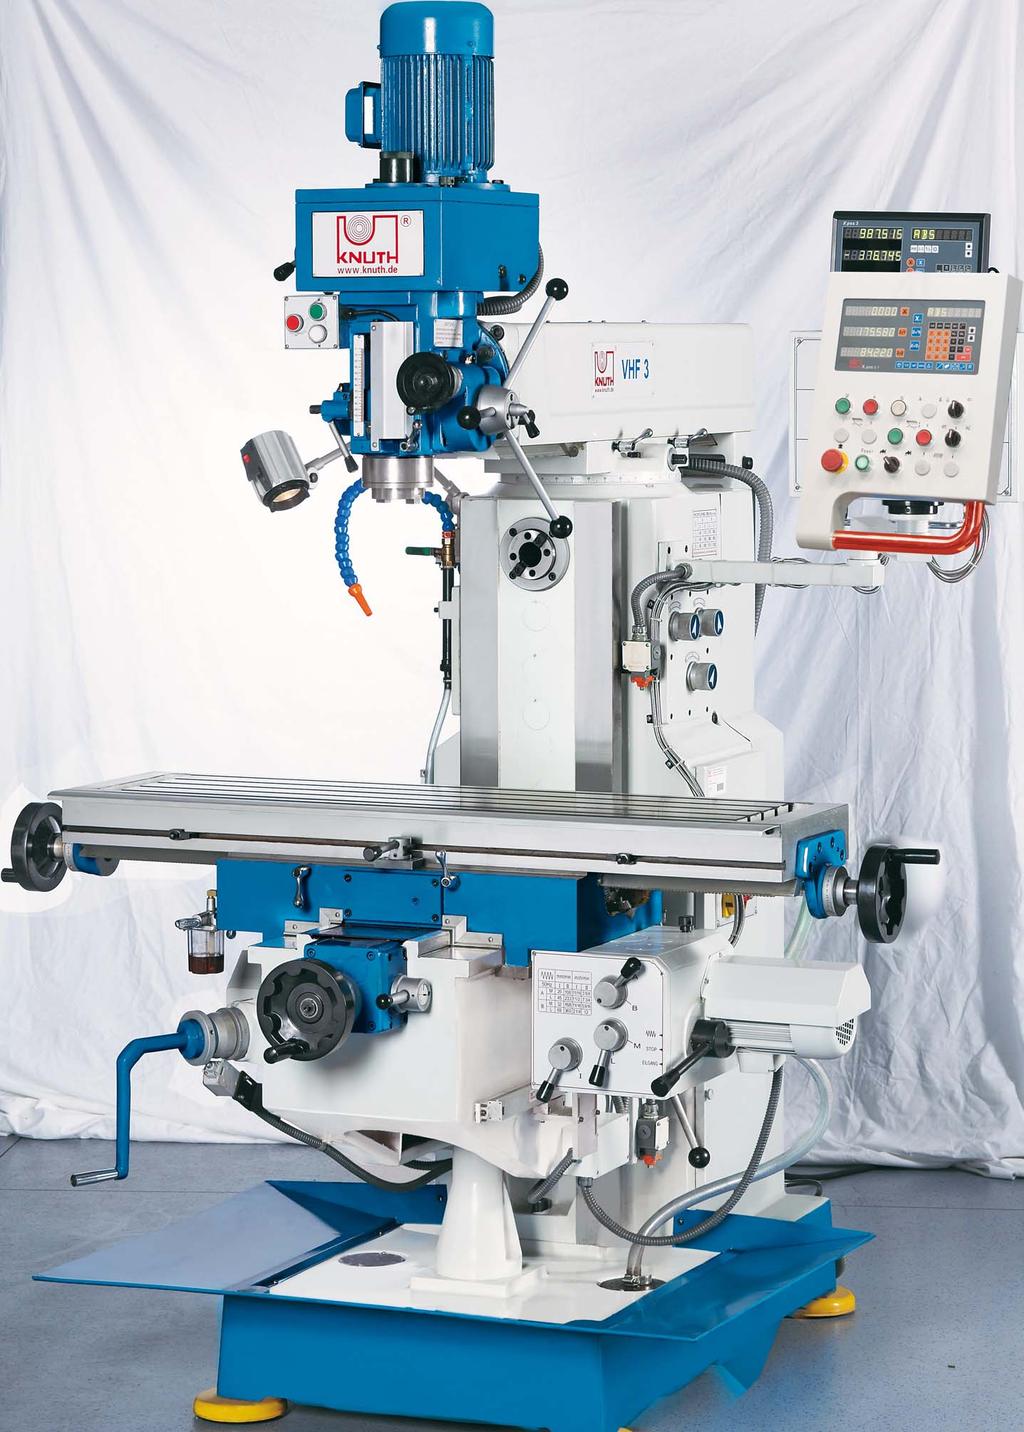 1024 - Y axis mm/min 1024 - Z axis mm/min 670 Vertical cutter head spindle mount ISO 40 spindle speeds (from - to / number) min -1 90-2000 / 8 quill stroke mm 120 quill feeds (3) mm/rev 0.08; 0.15; 0.